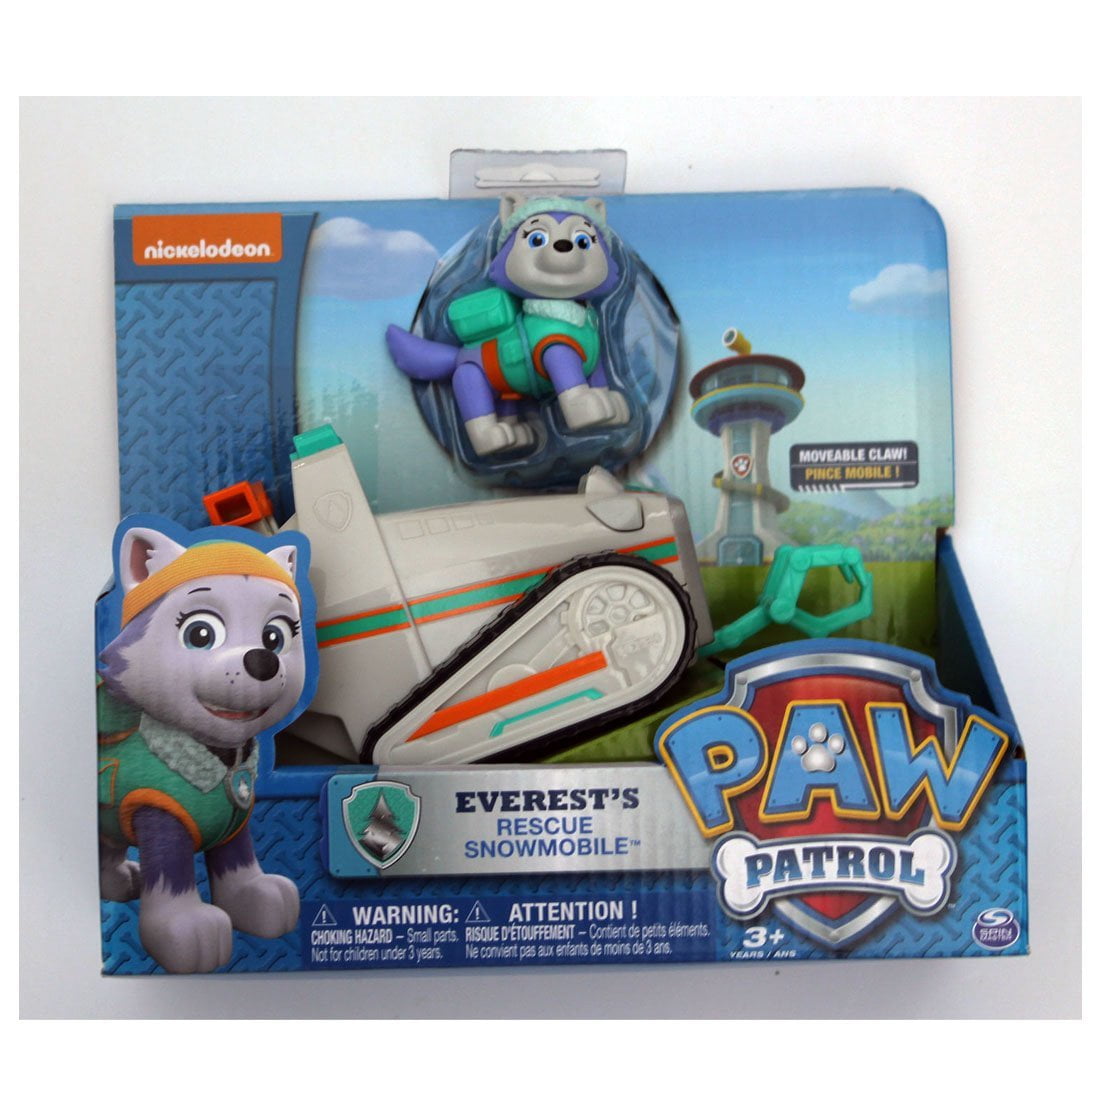 Nickelodeon Paw Patrol EVEREST'S Rescue Snowmobile Vehicle